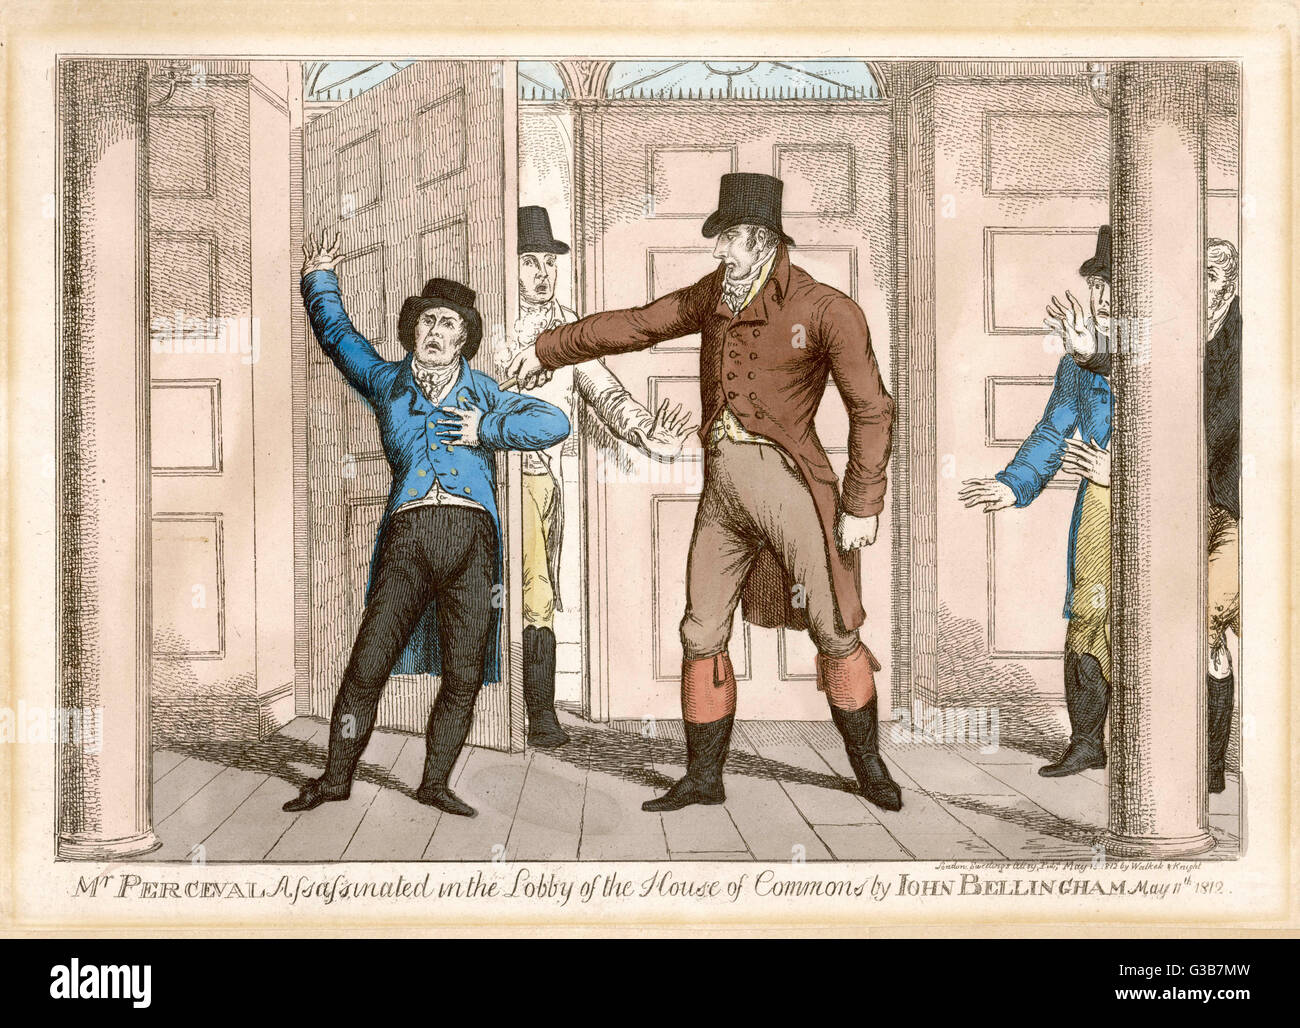 John Bellingham, a merchant, shoots prime minister Spencer  Perceval in the lobby of the  House of Commons, blaming the  Tory government for his  business failure.     Date: 1762 - 1812 Stock Photo